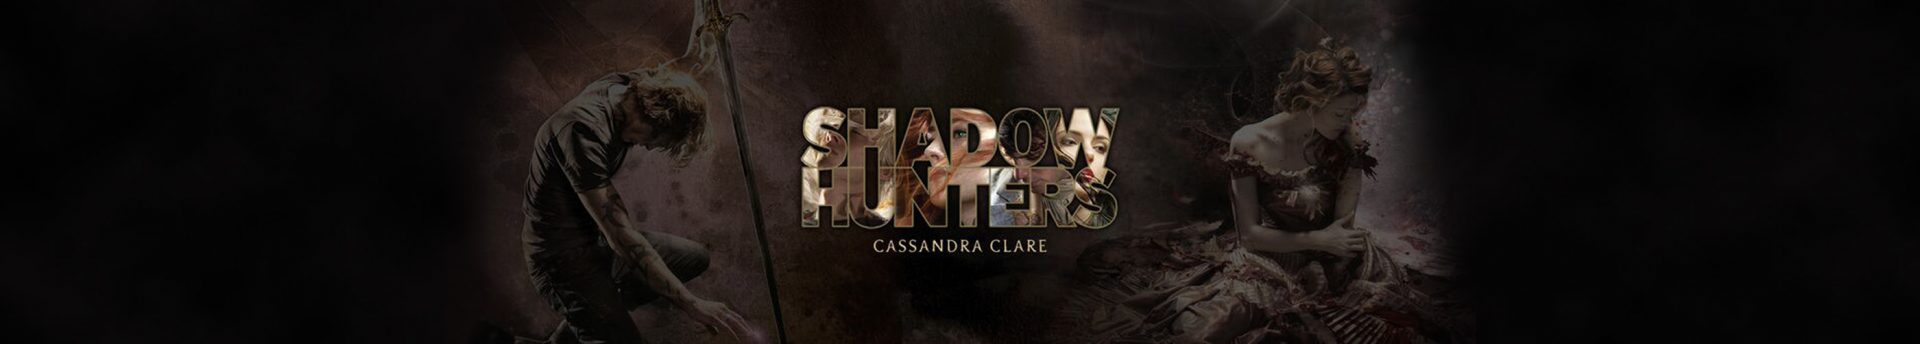 chain of thorns cassandra clare release date